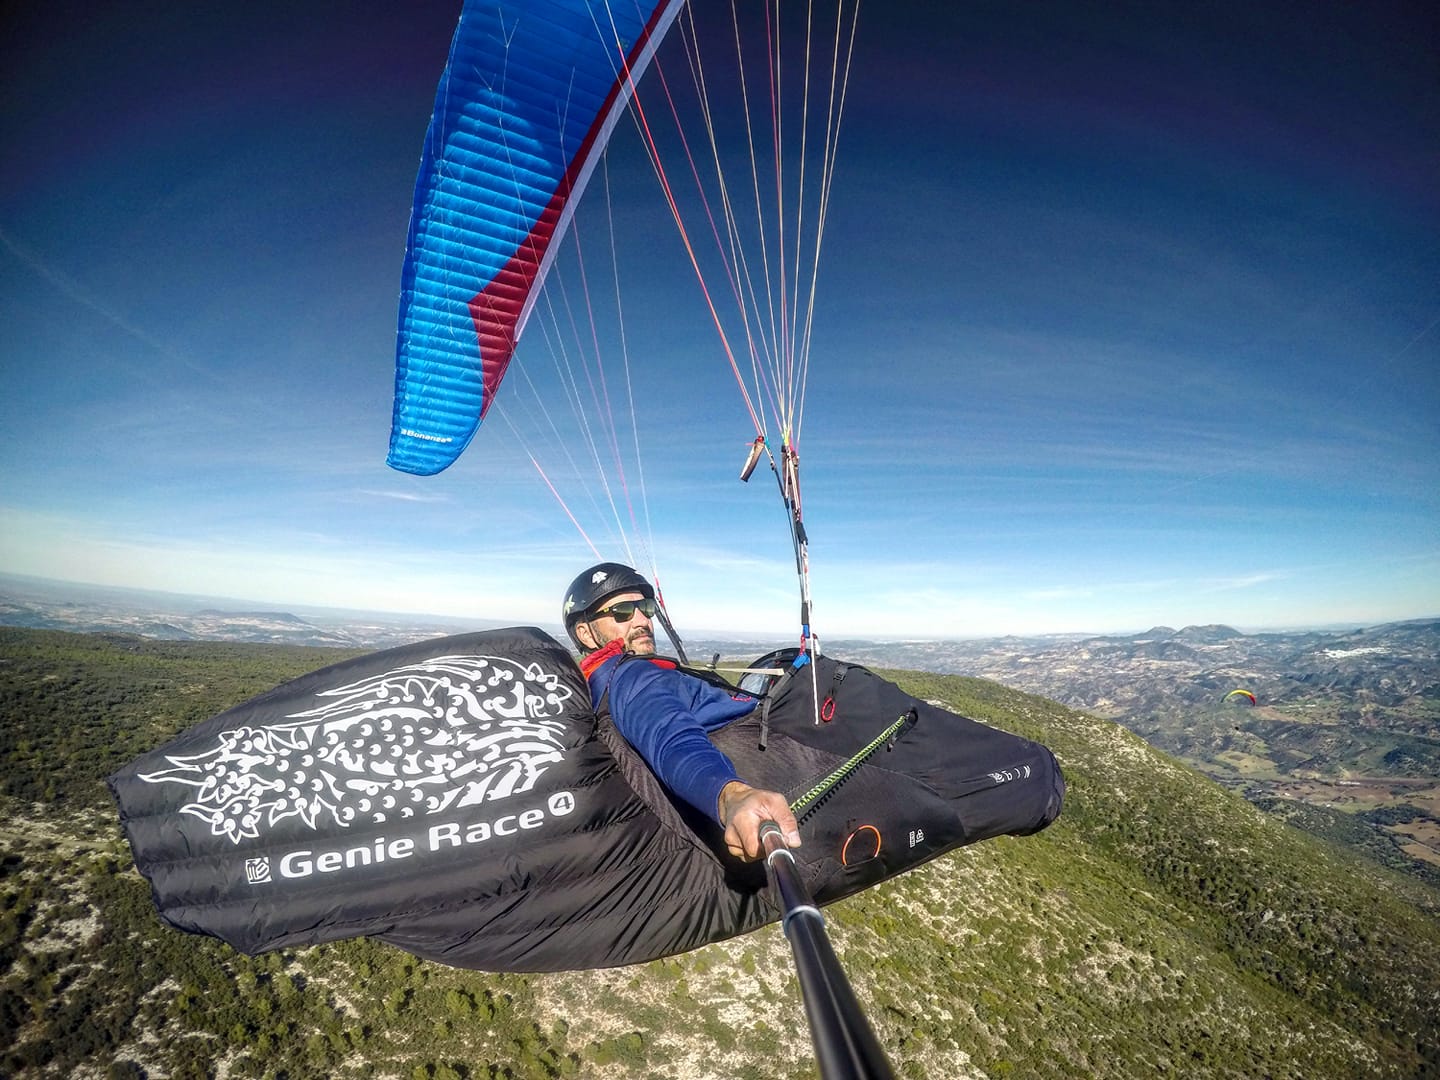 Our Man Stan on winning paragliding street this Summer!